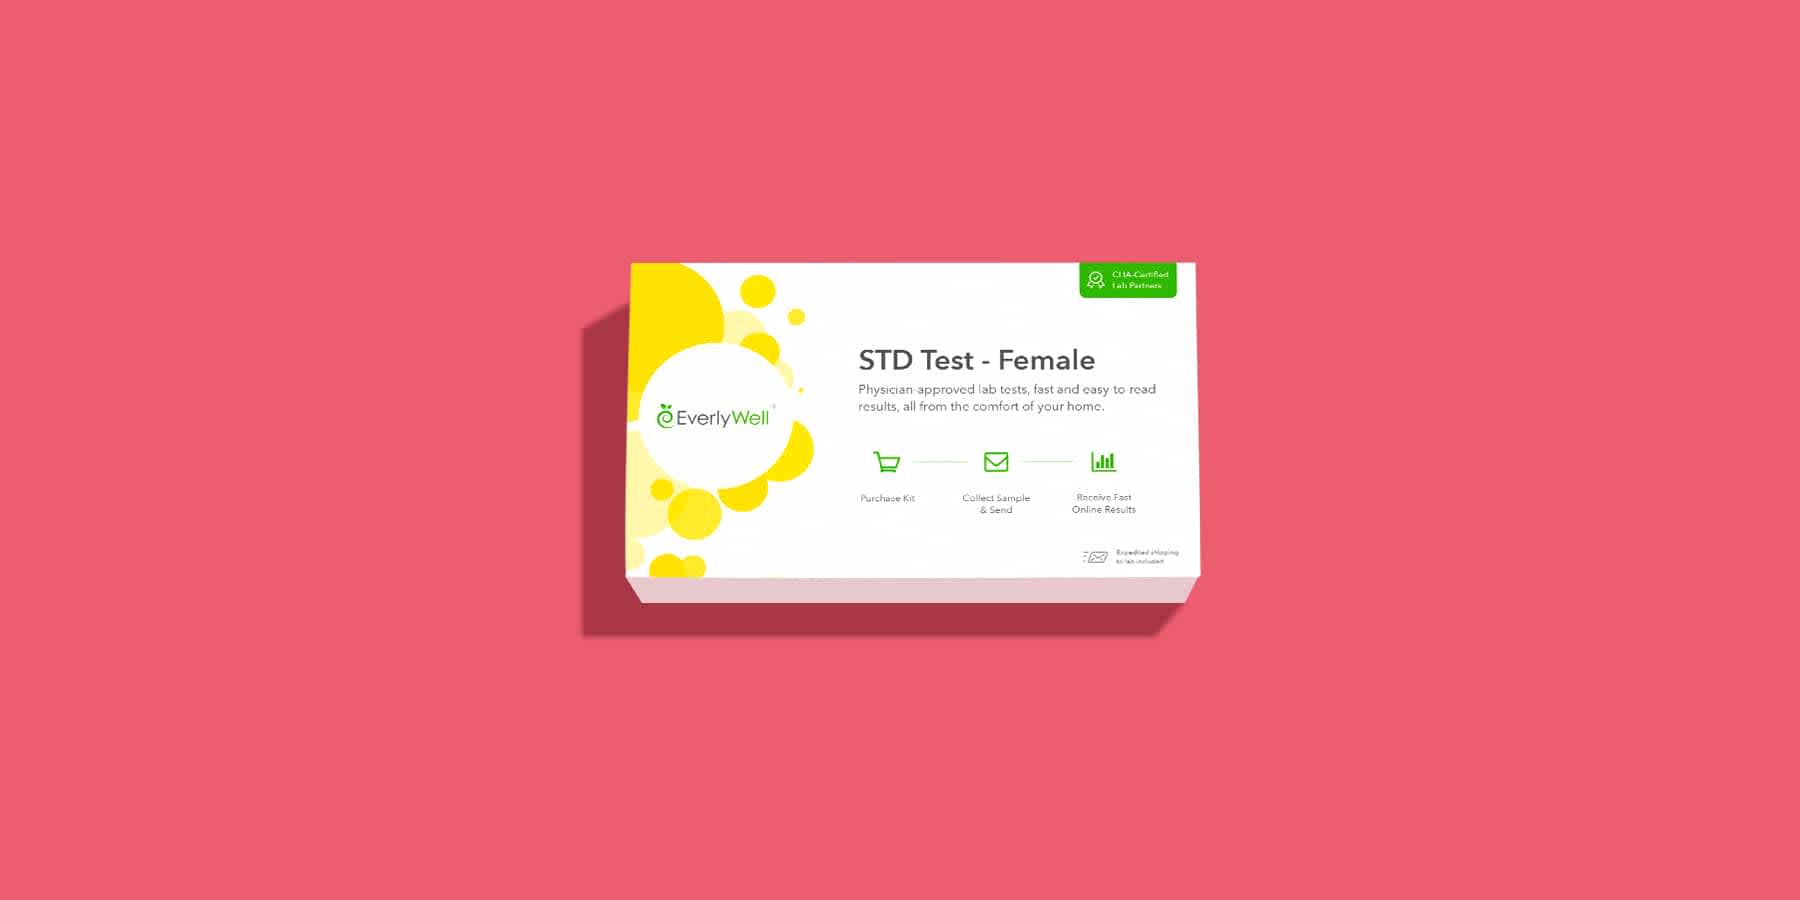 Image of Everlywell STD Test - Female kit (included syphilis test) against a red background